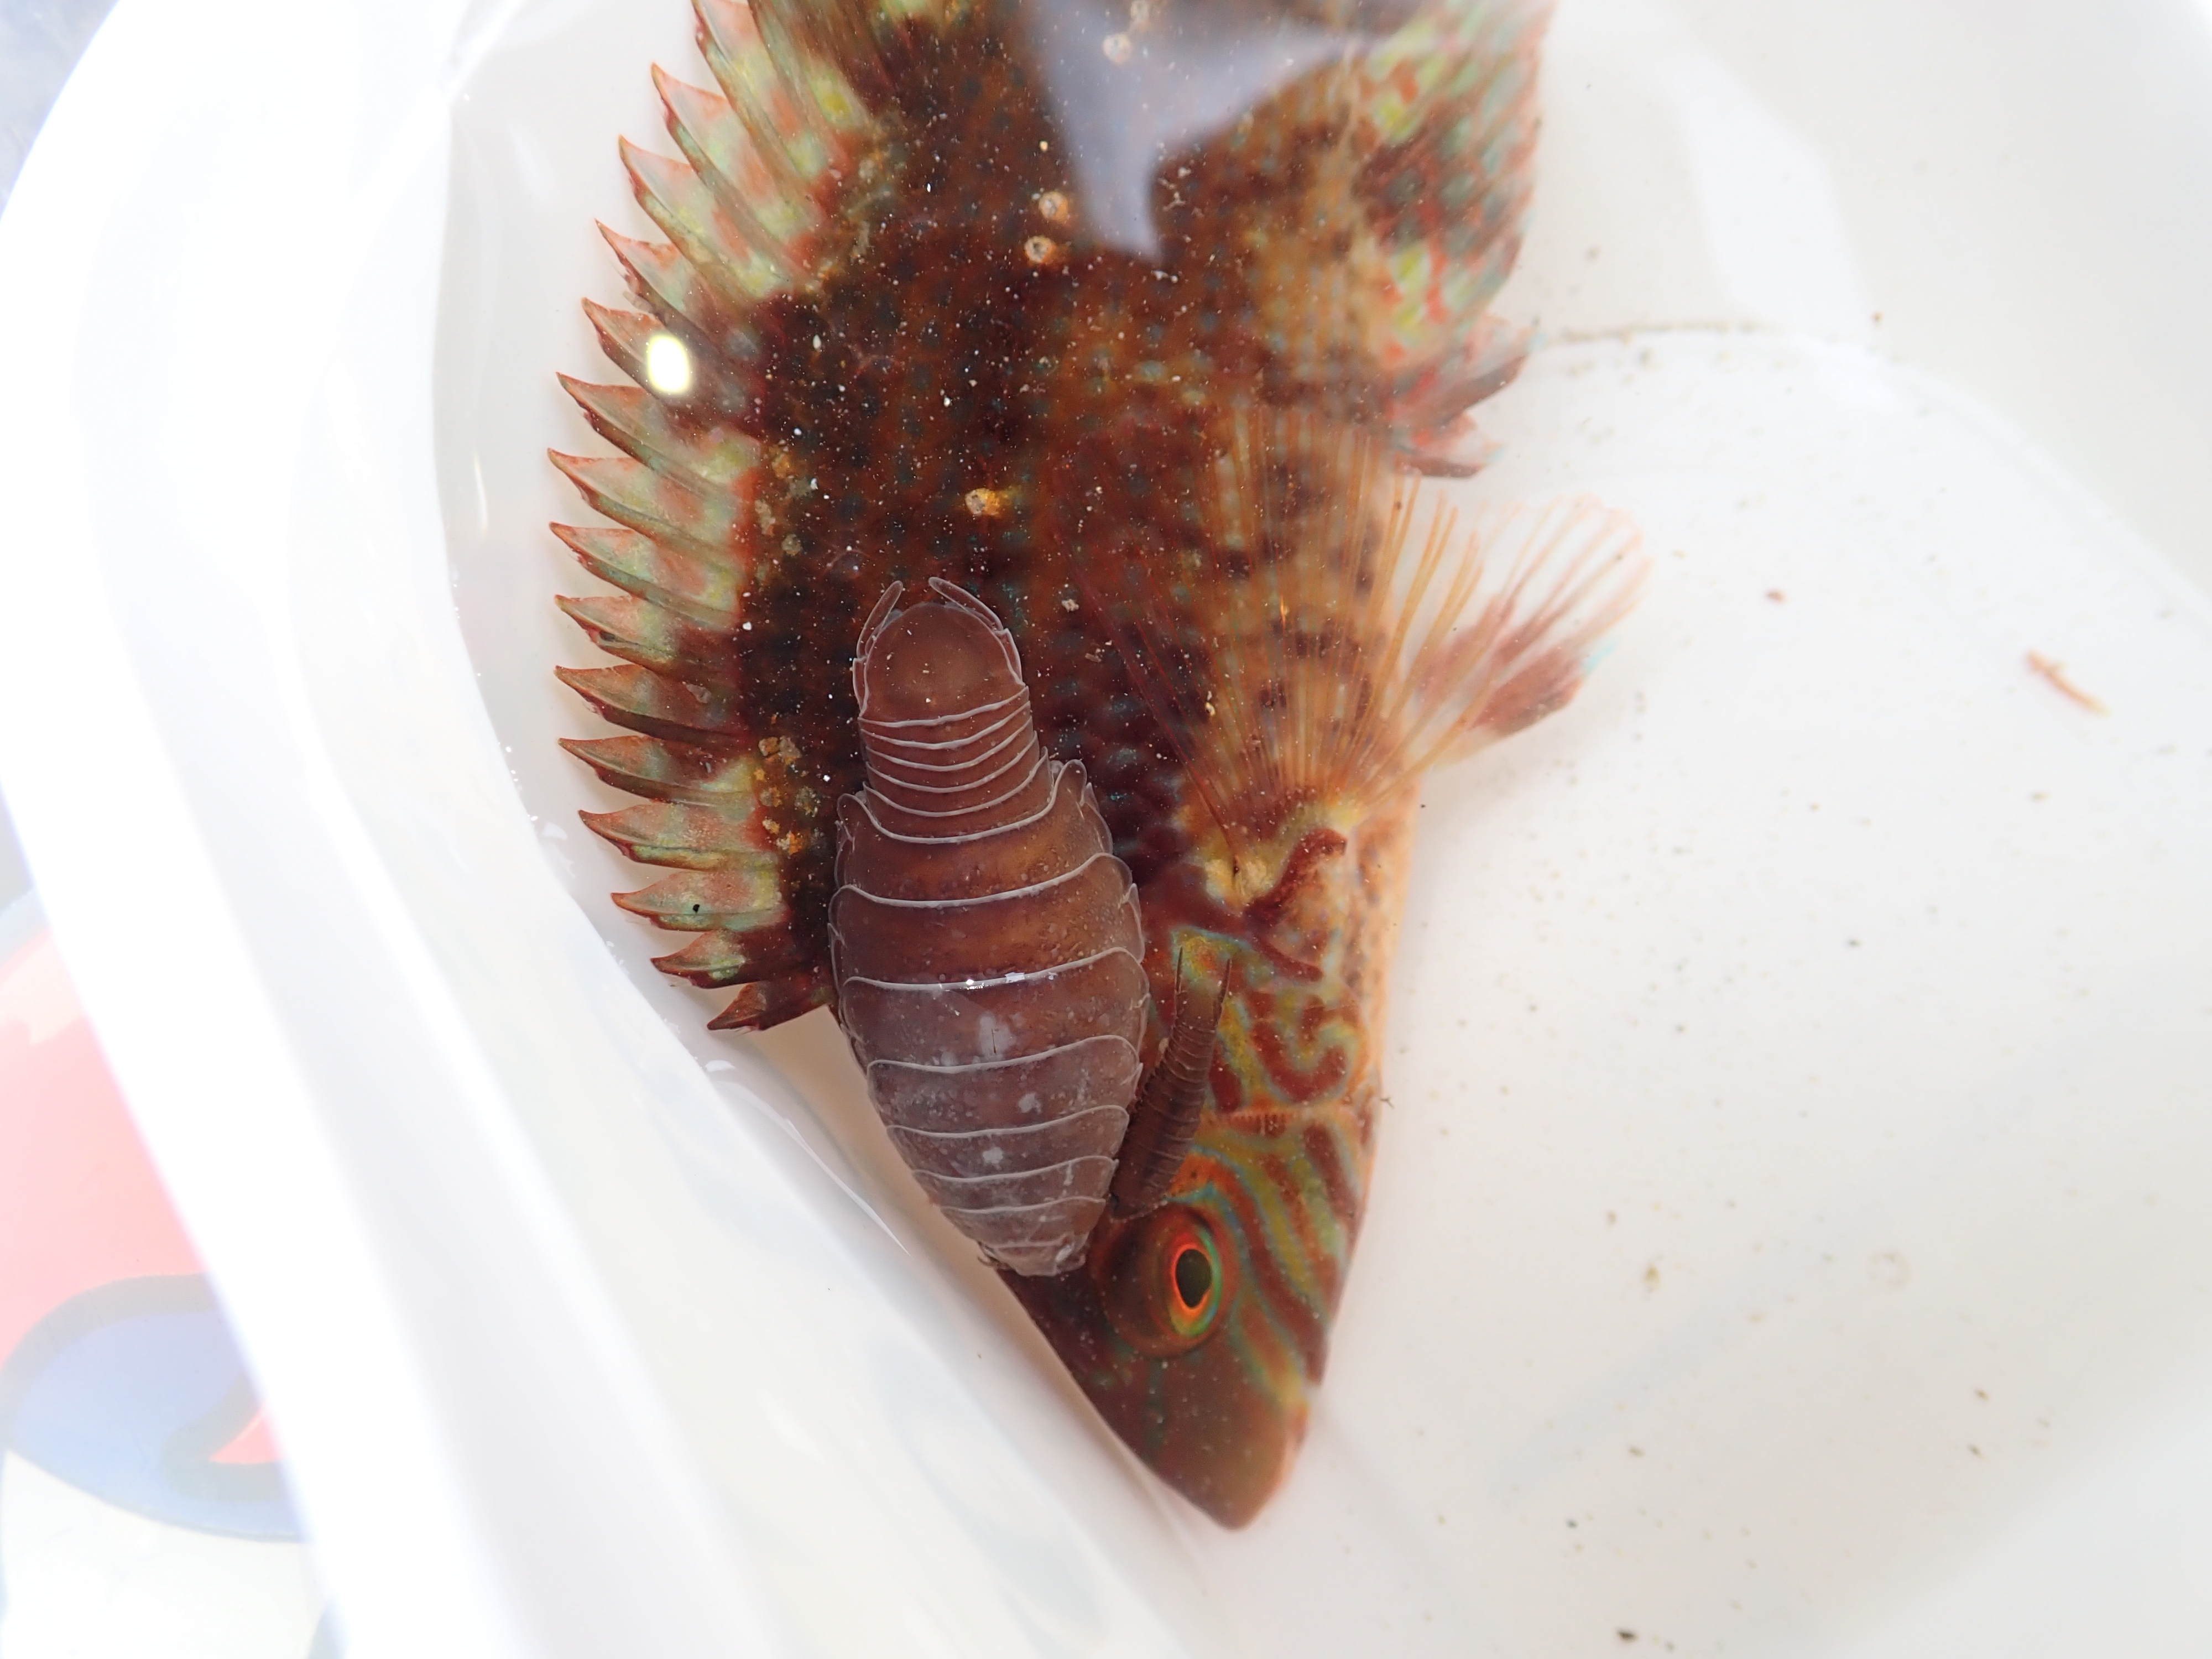 Enough to put you off your food - Anilocra physodes parasitic isopods feeding on the wrasse.